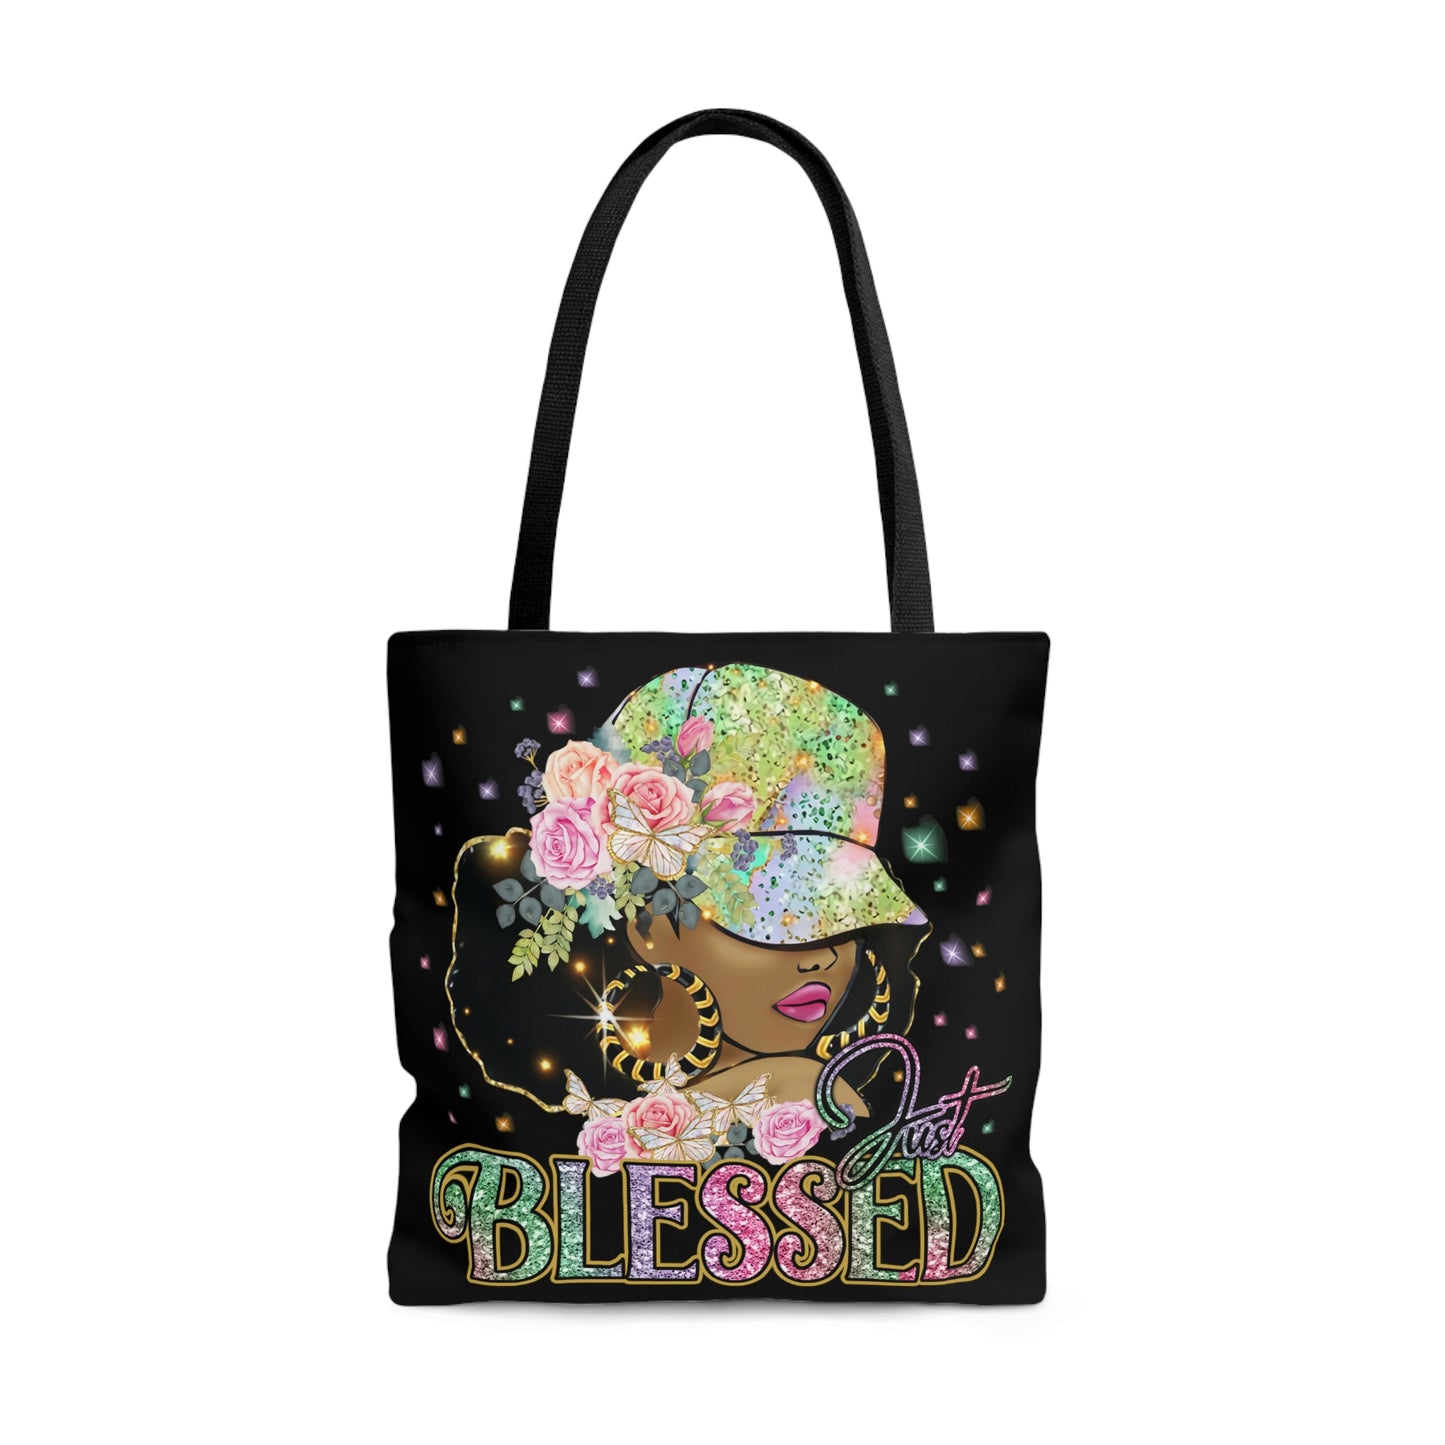 Just Blessed Tote Bag